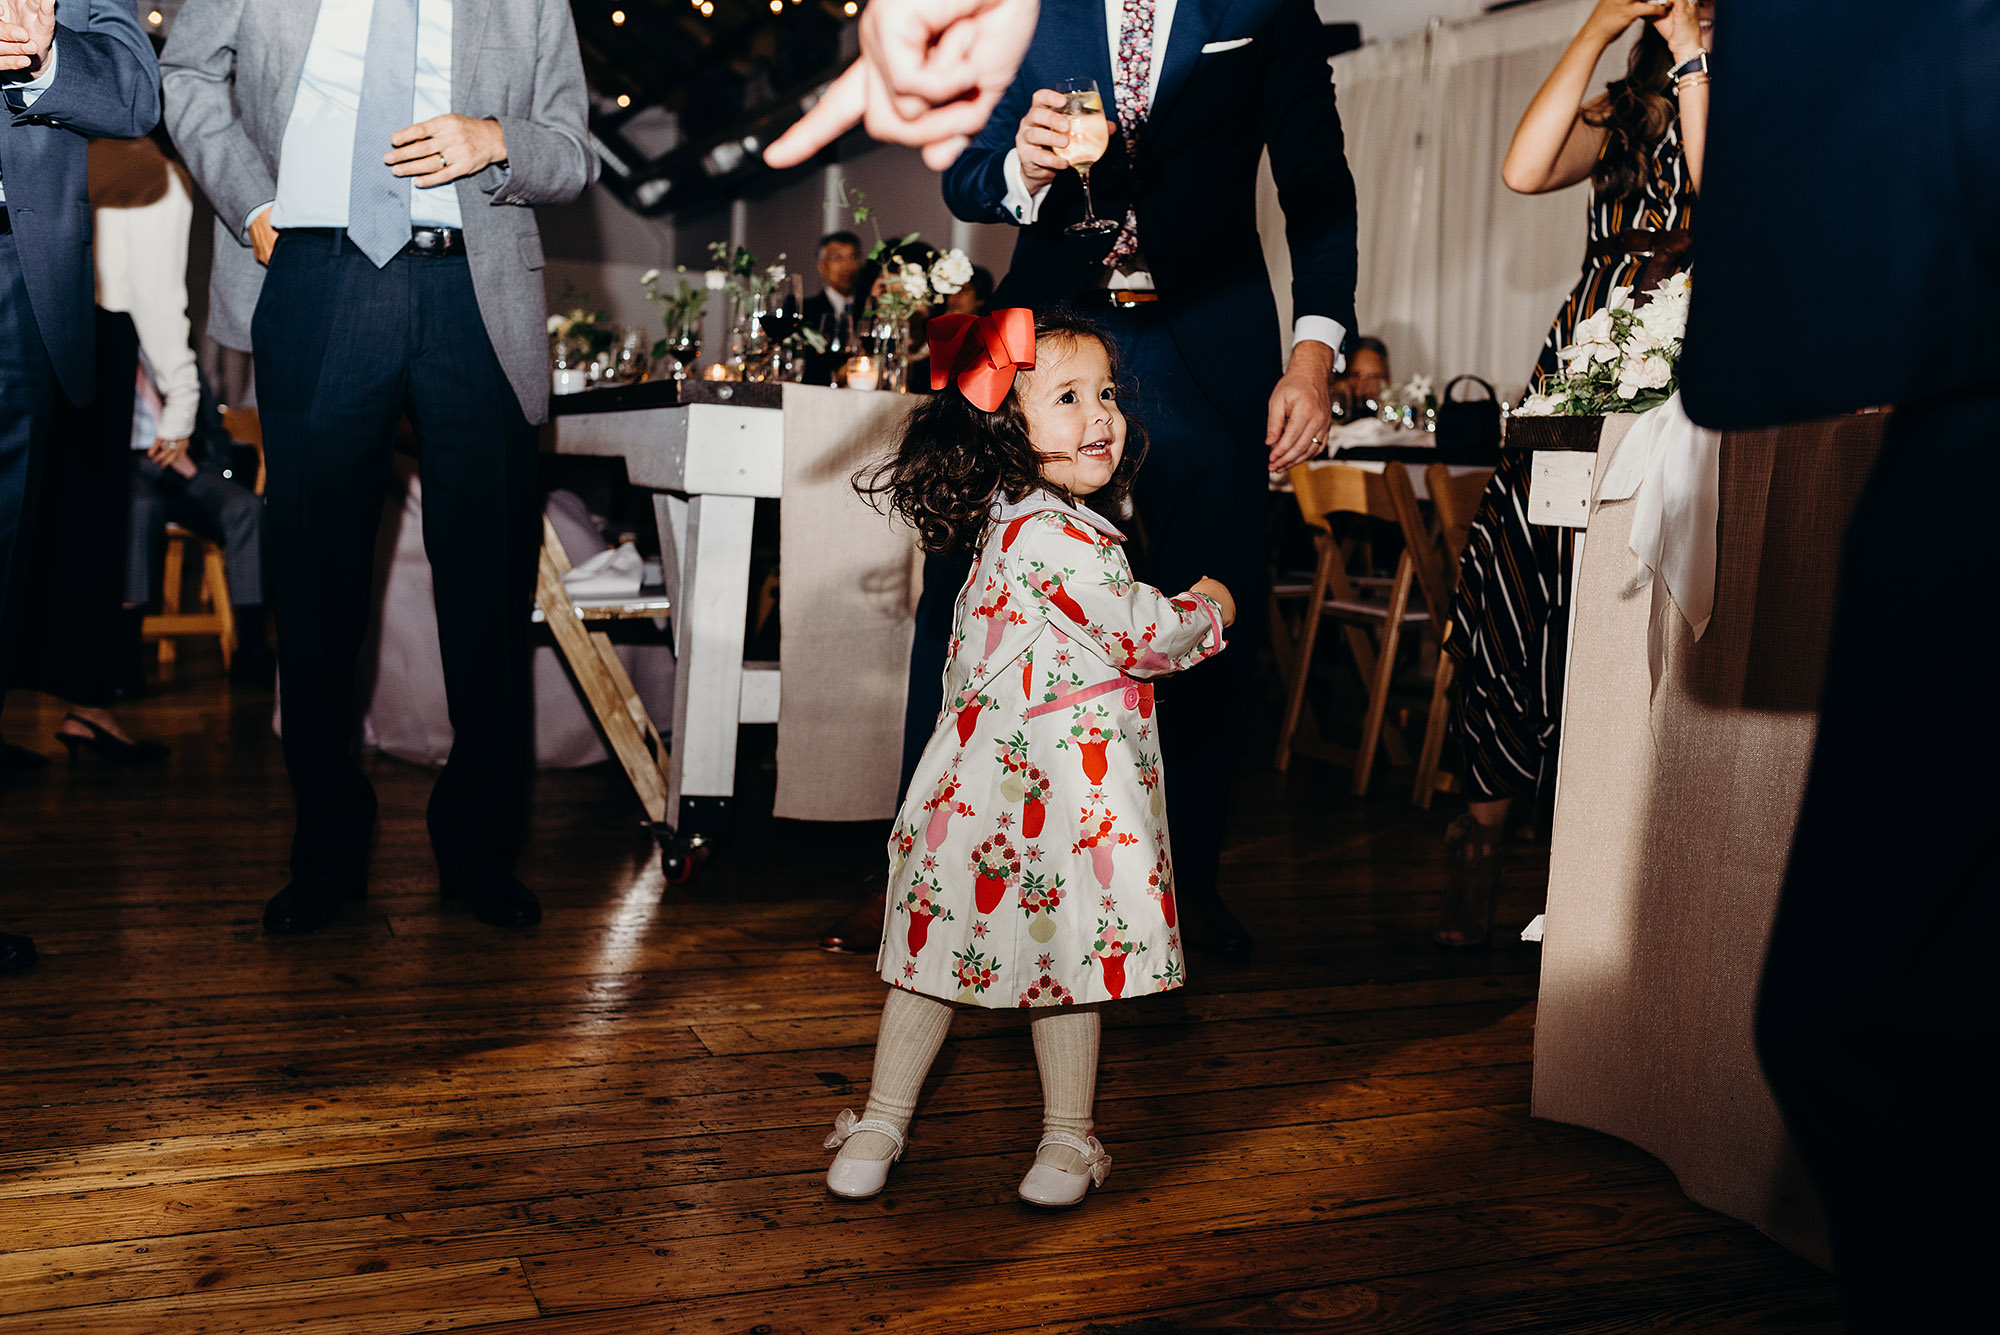 Little Girl Dancing at Reception